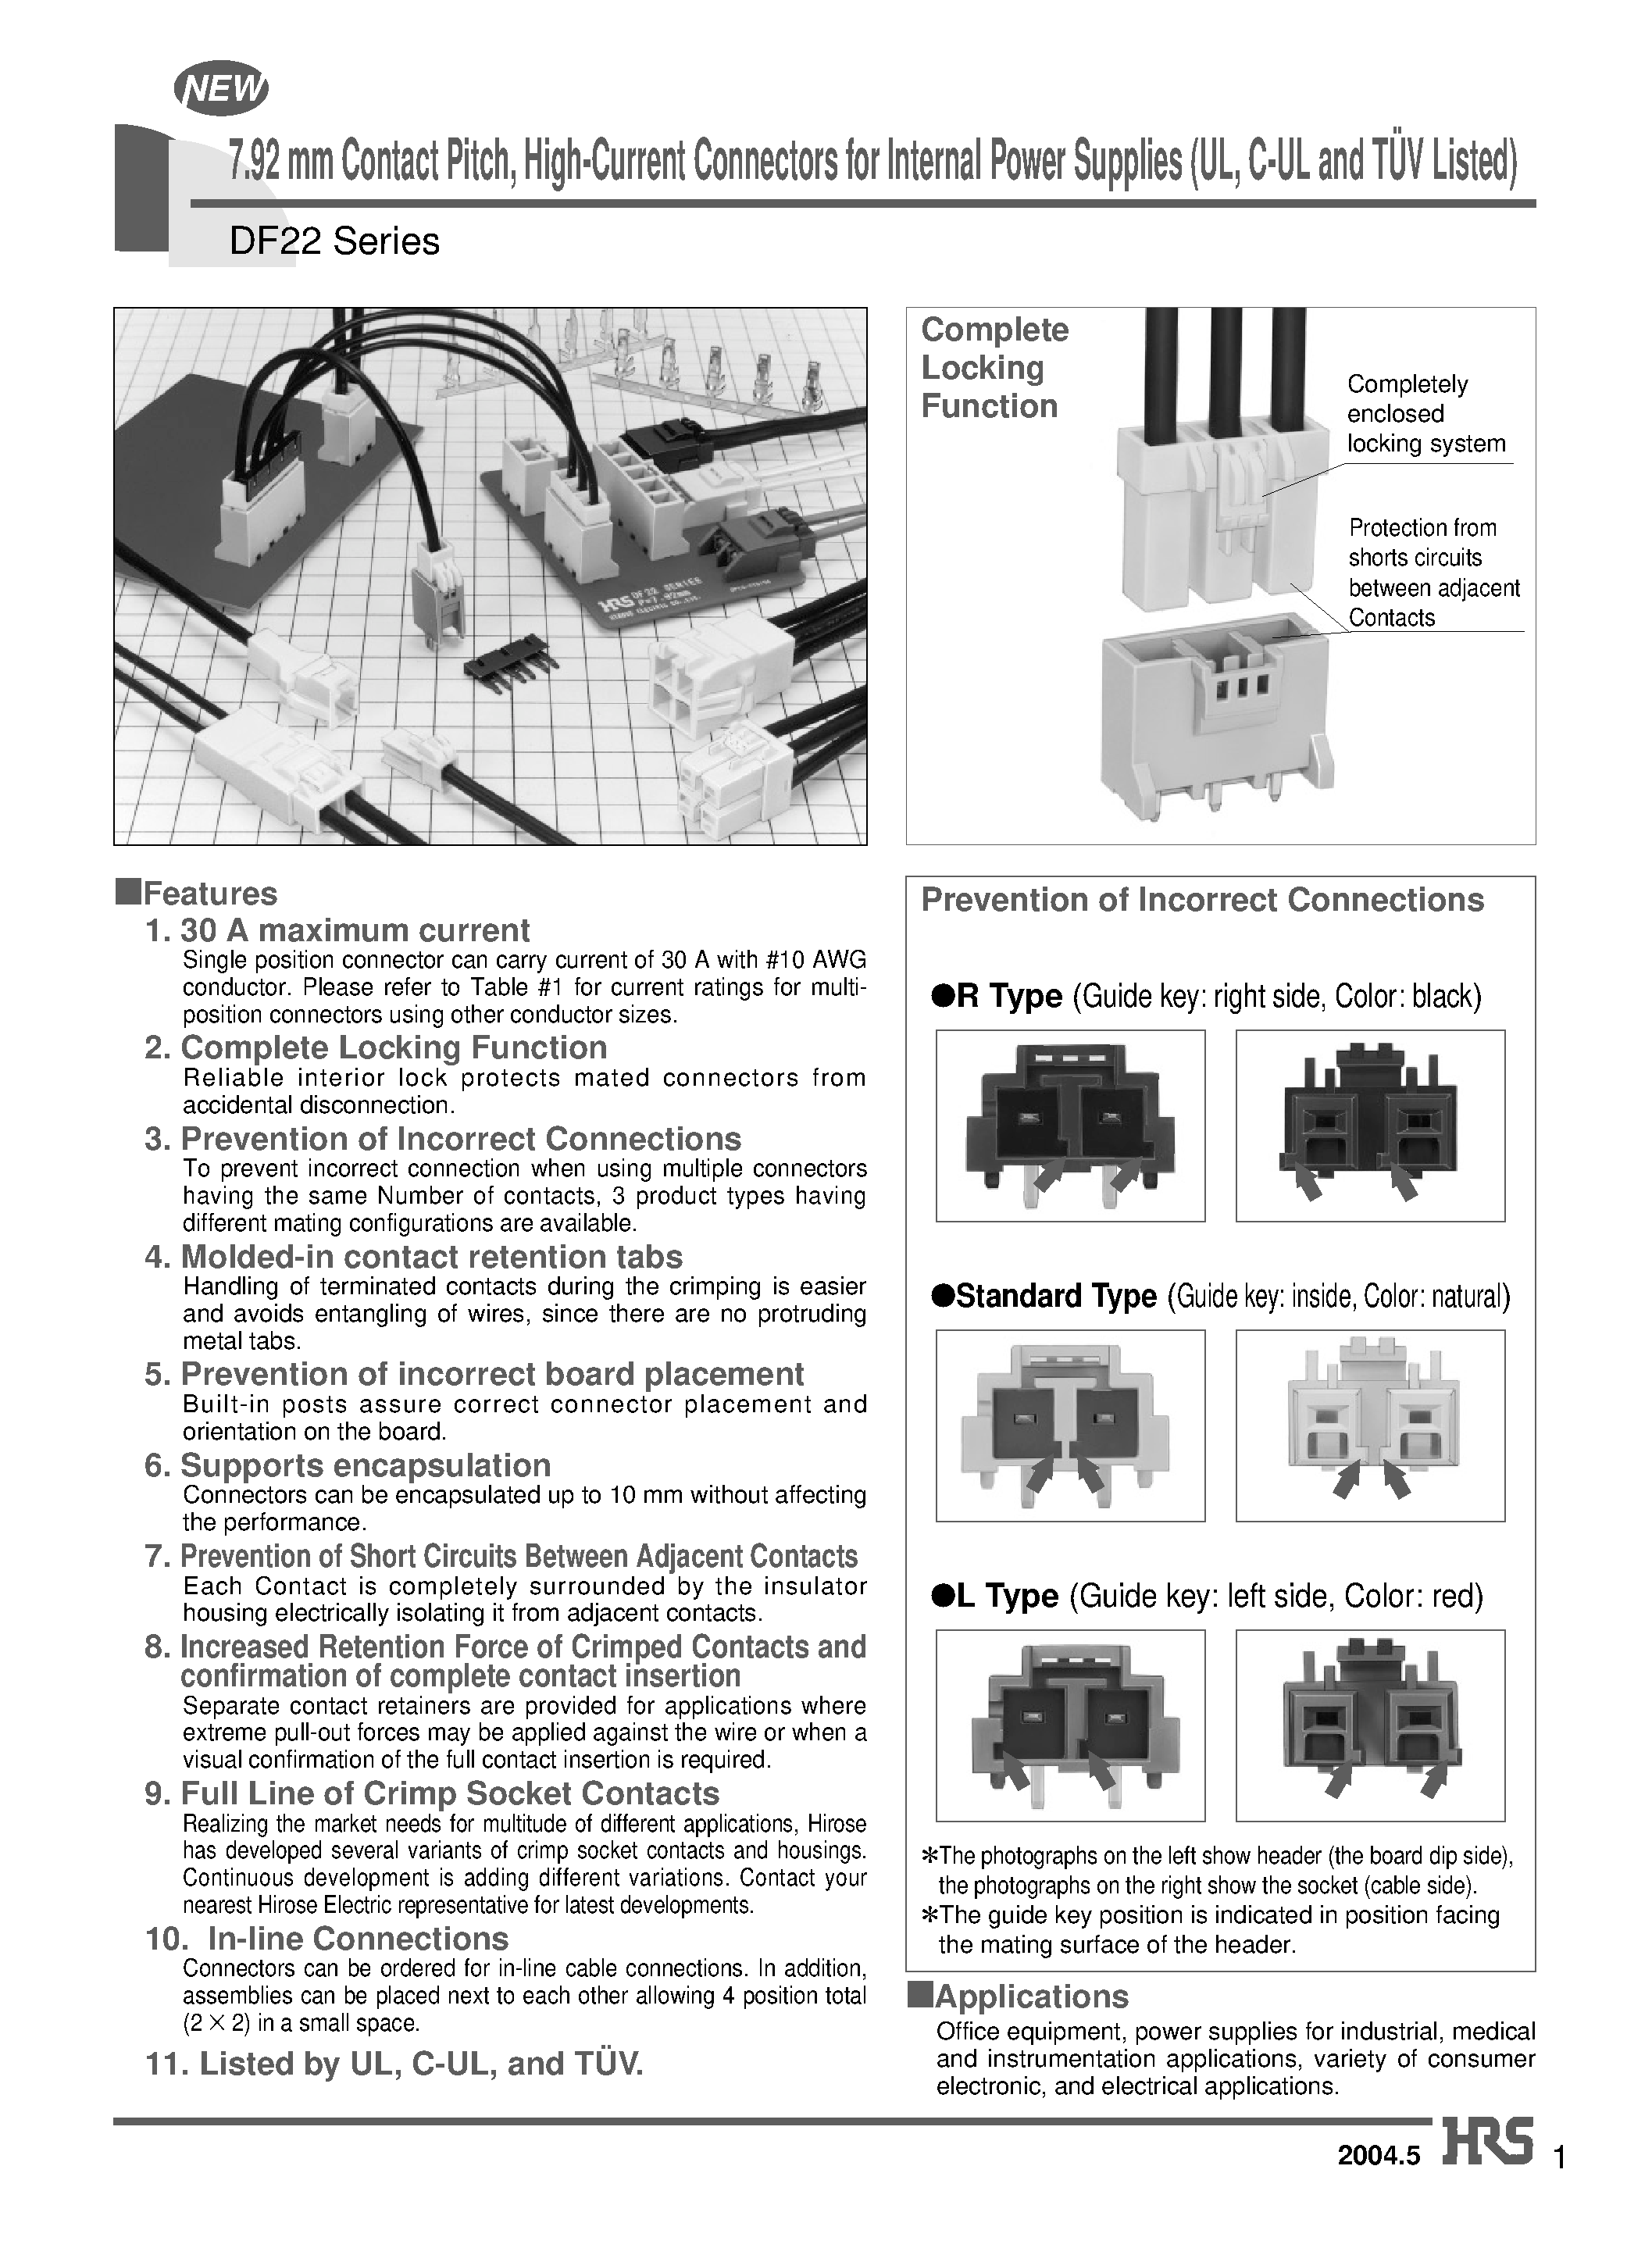 Даташит DF22A-1S-7.92C - 7.92 mm Contact Pitch/ High-Current Connectors for Internal Power Supplies (UL/ C-UL and TUV Listed) страница 1